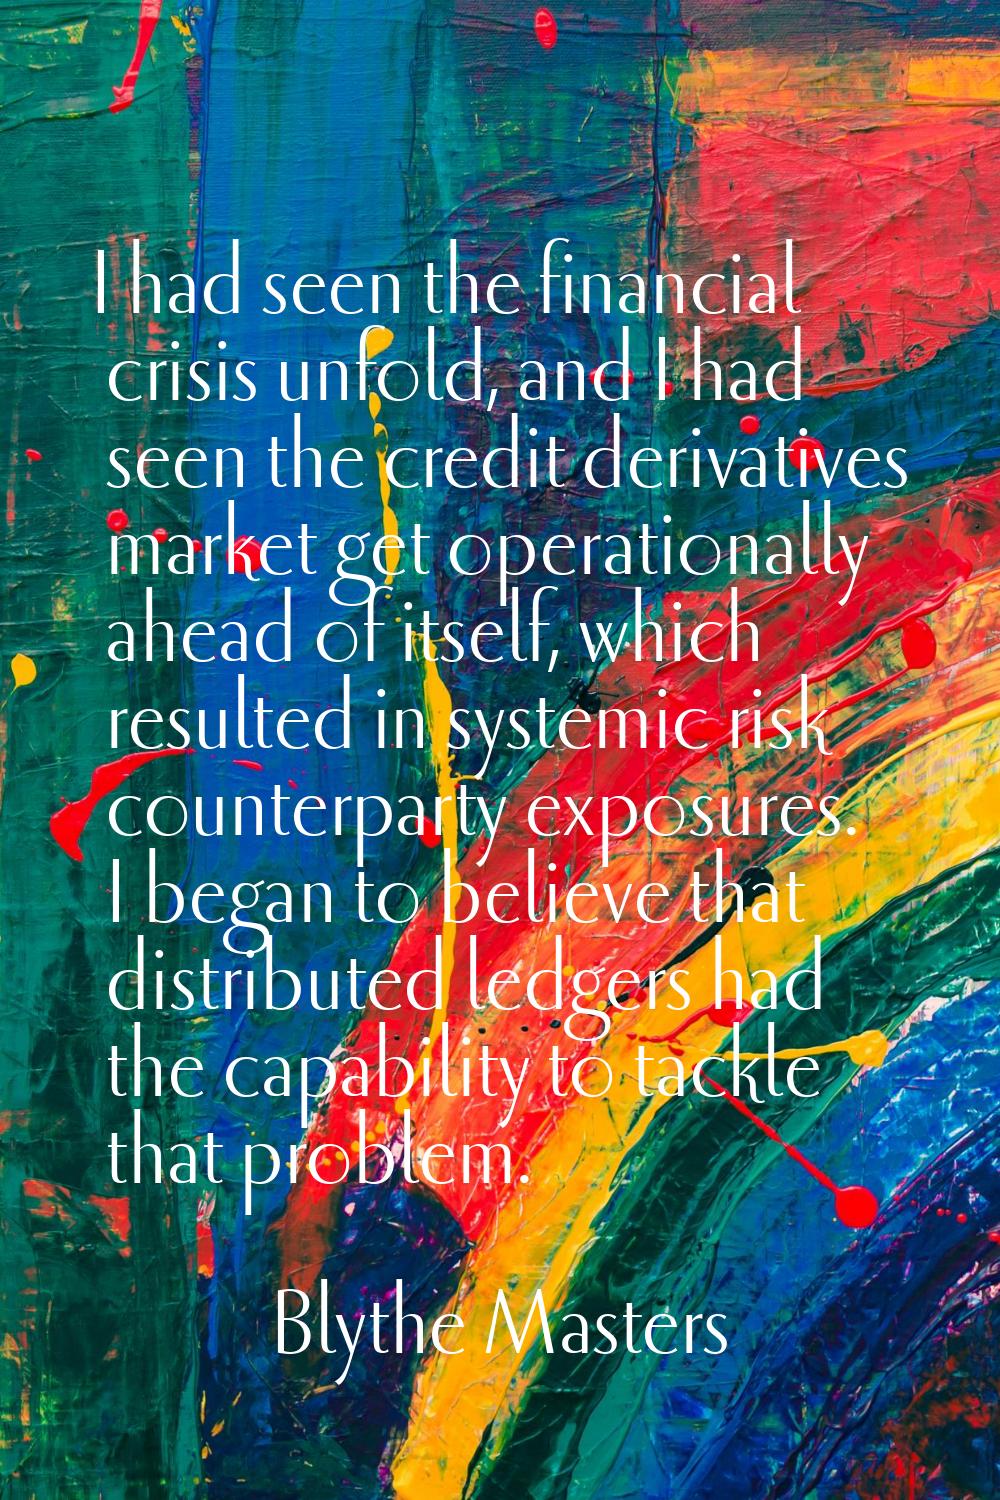 I had seen the financial crisis unfold, and I had seen the credit derivatives market get operationa